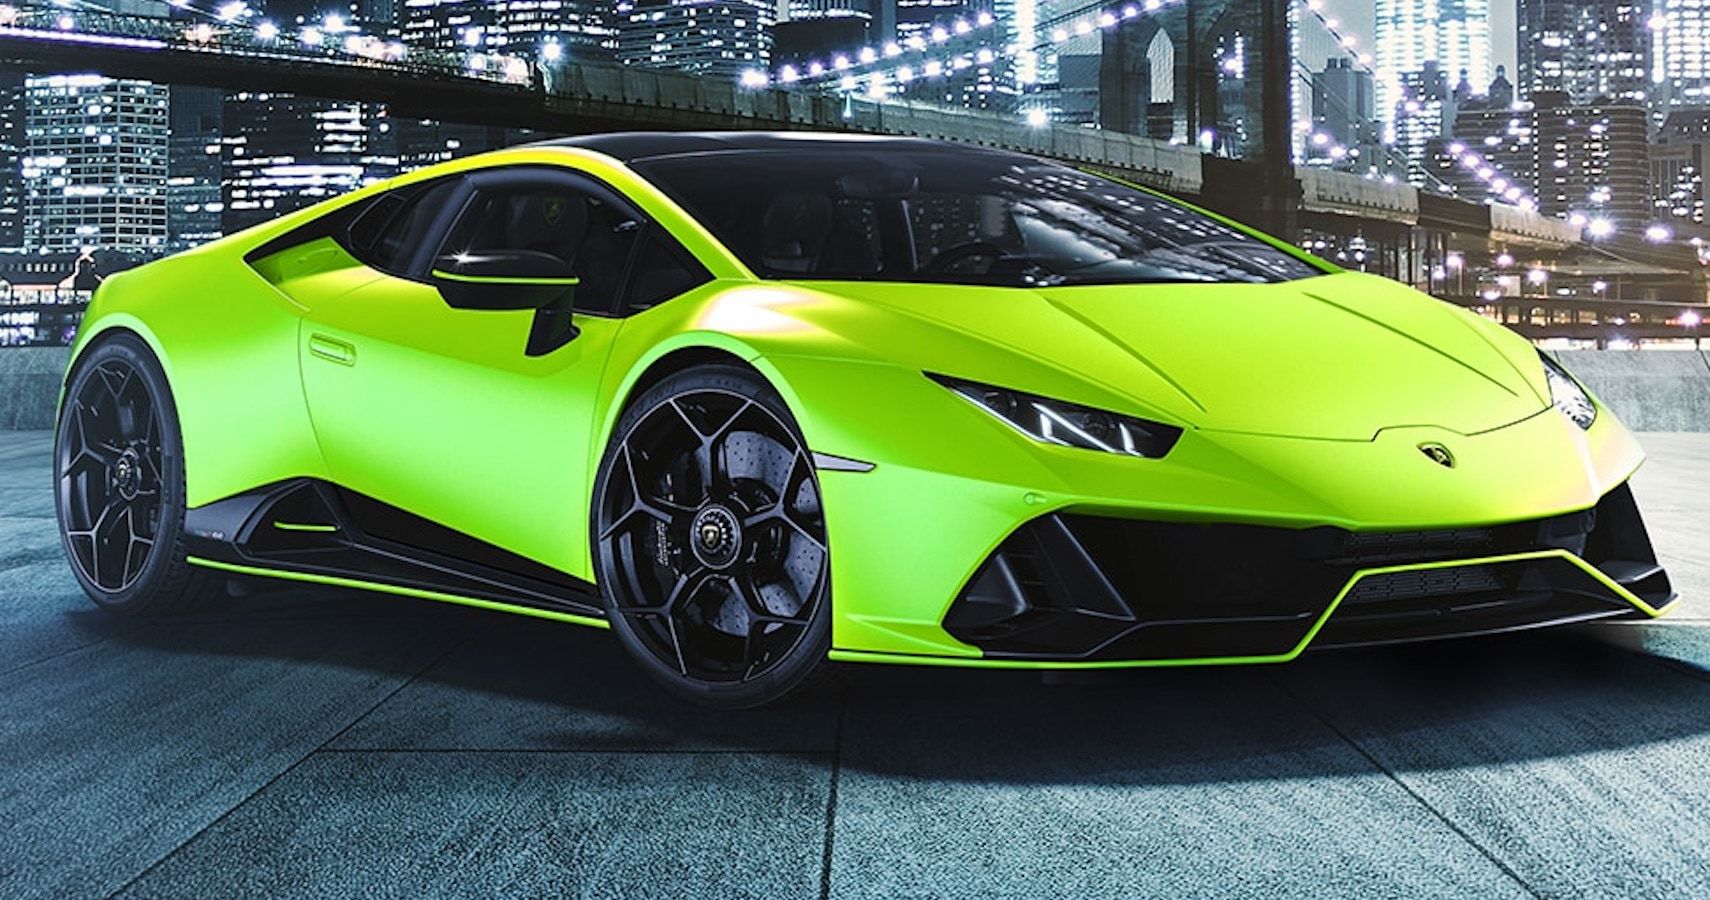 Two Bold And Bright Lamborghini Huracan Evos Sporting Fluo Capsule Colors Spotted